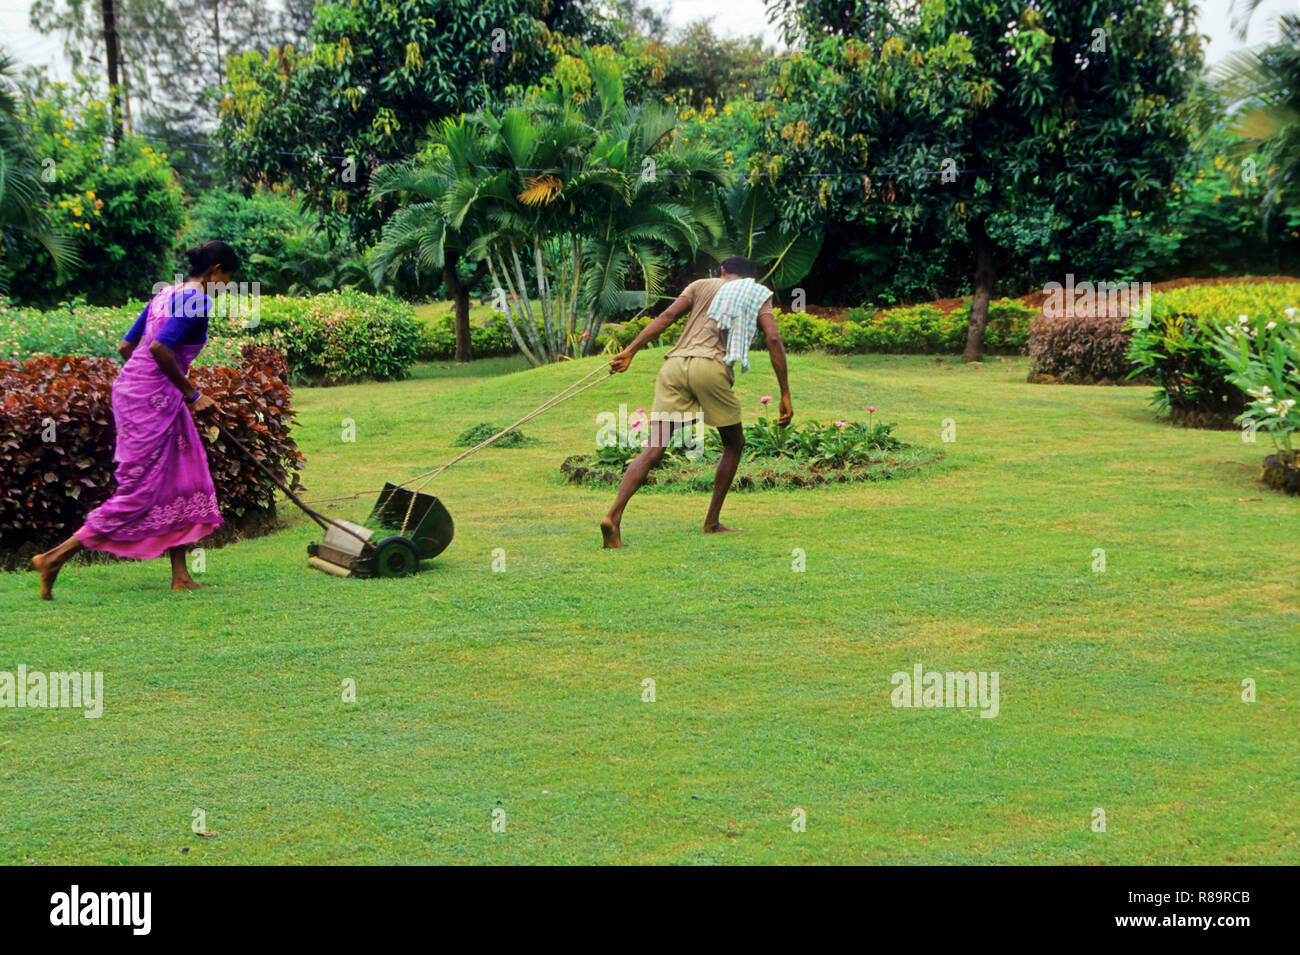 Green grass lawn being mowed manually by man and women Stock Photo